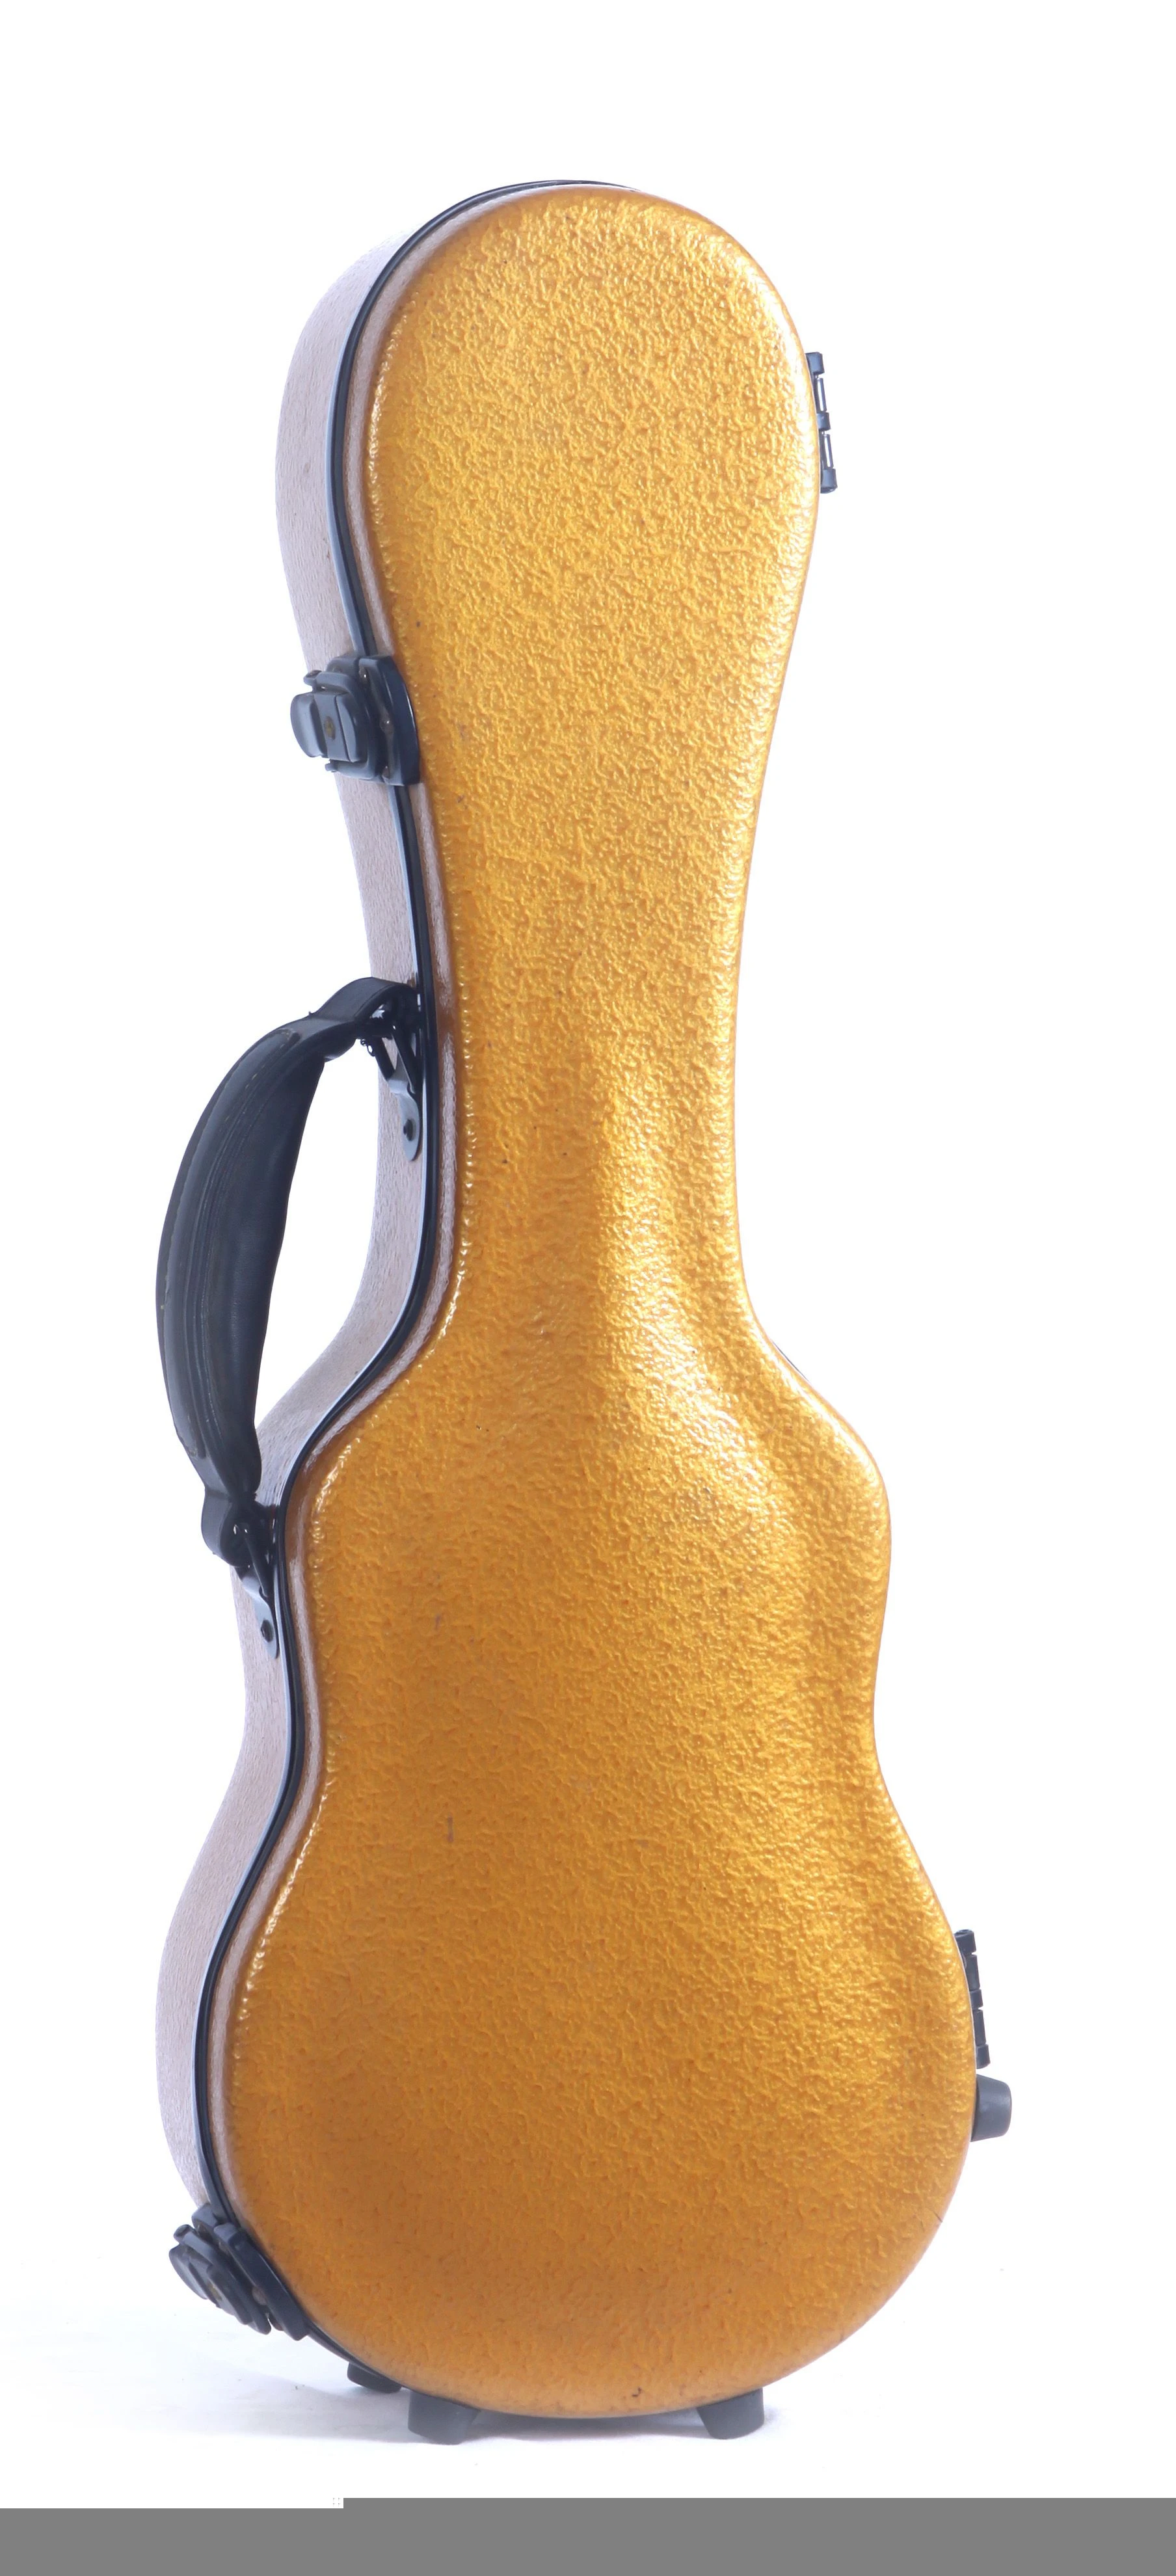 The manufacturer wholesales high quality classical guitar cases